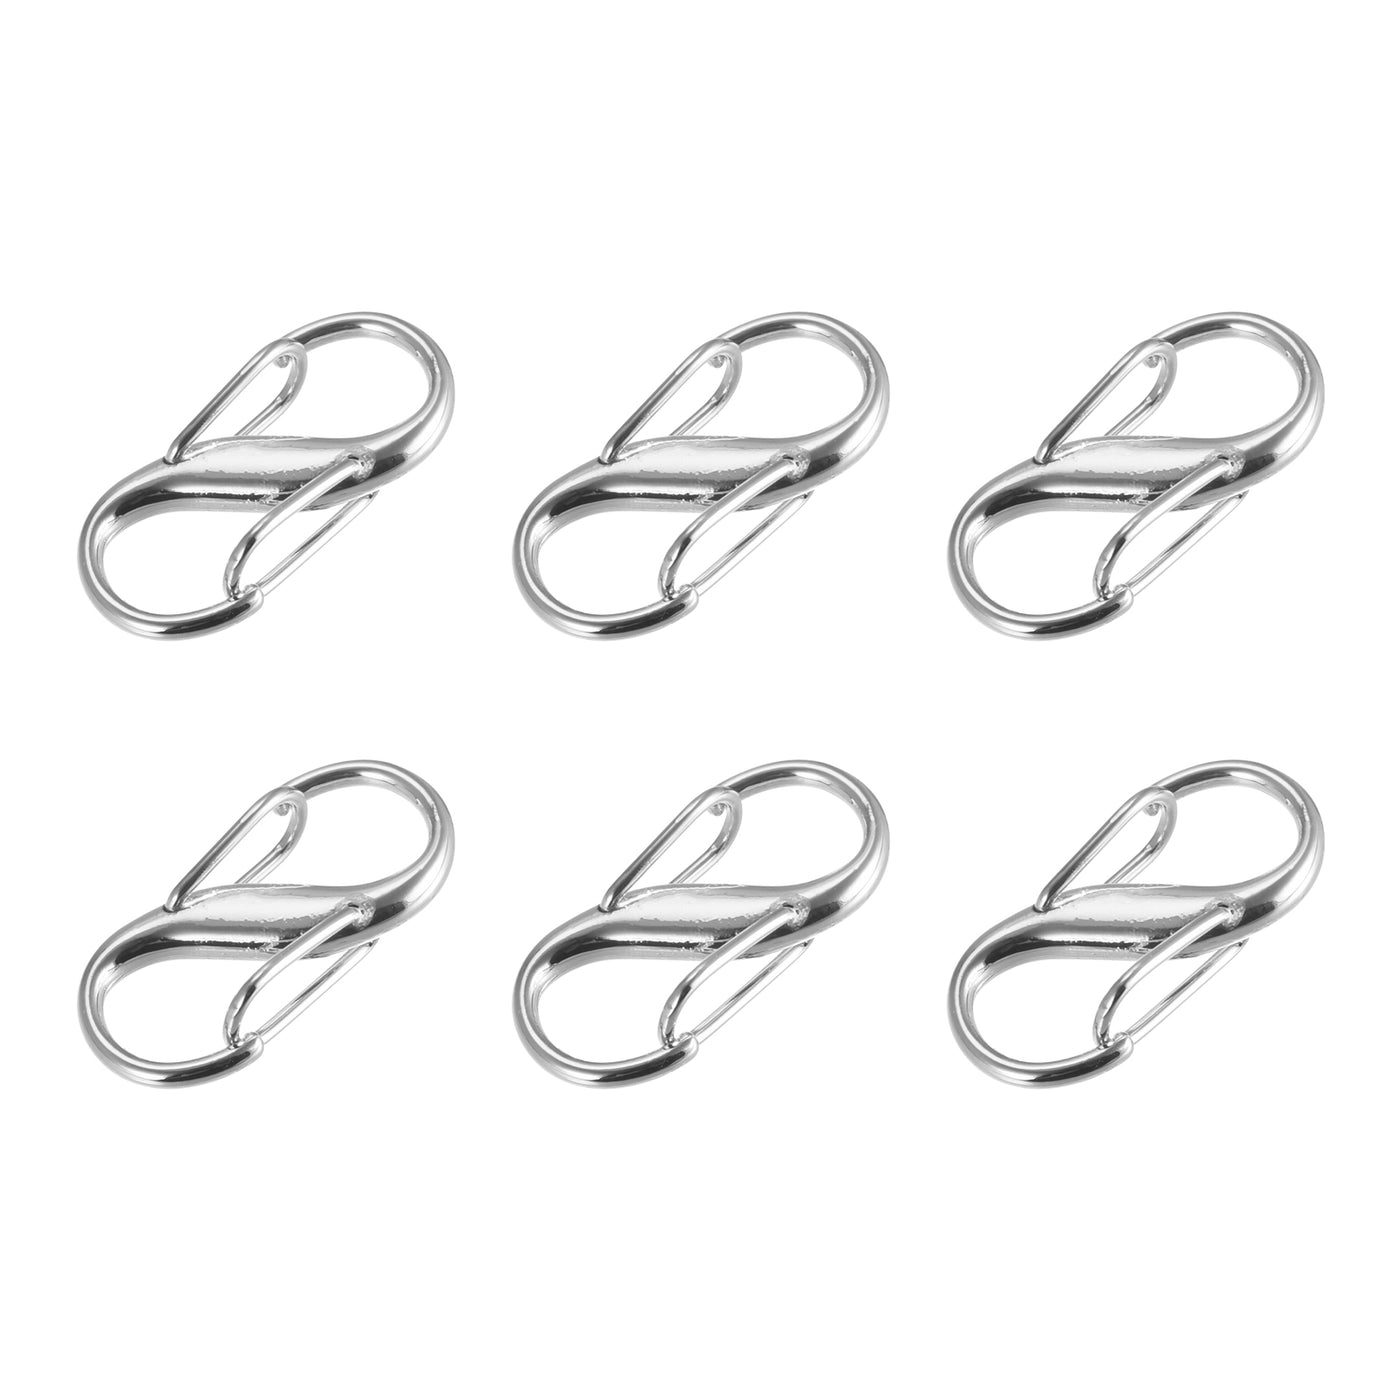 uxcell Uxcell Adjustable Metal Buckle for Chain Strap, 6Pcs 27x13mm Chain Shortener, Silver